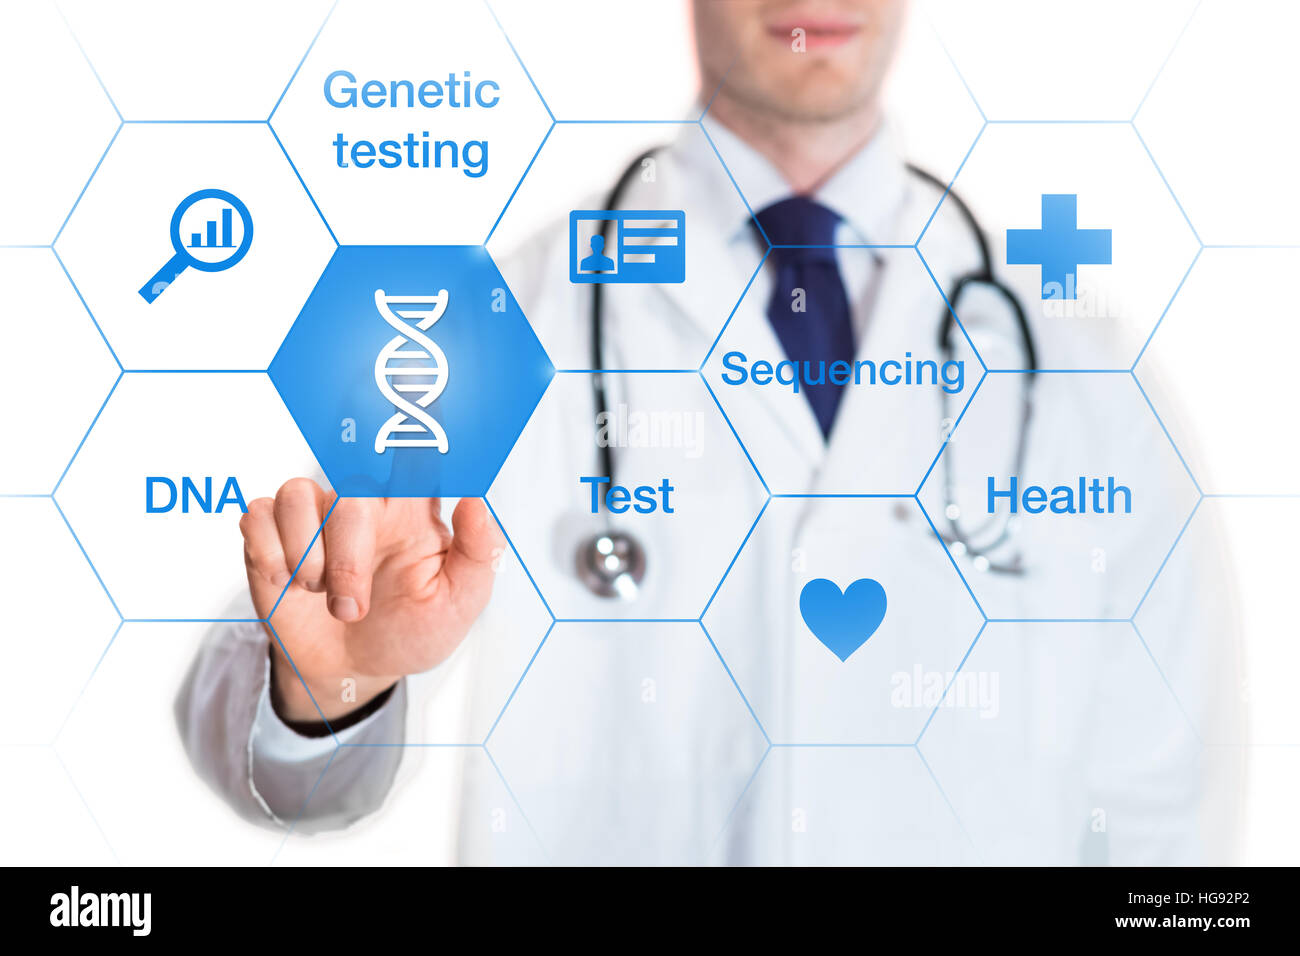 Genetic testing concept with DNA icon and words on a screen and a medical doctor touching a button, isolated on white background Stock Photo